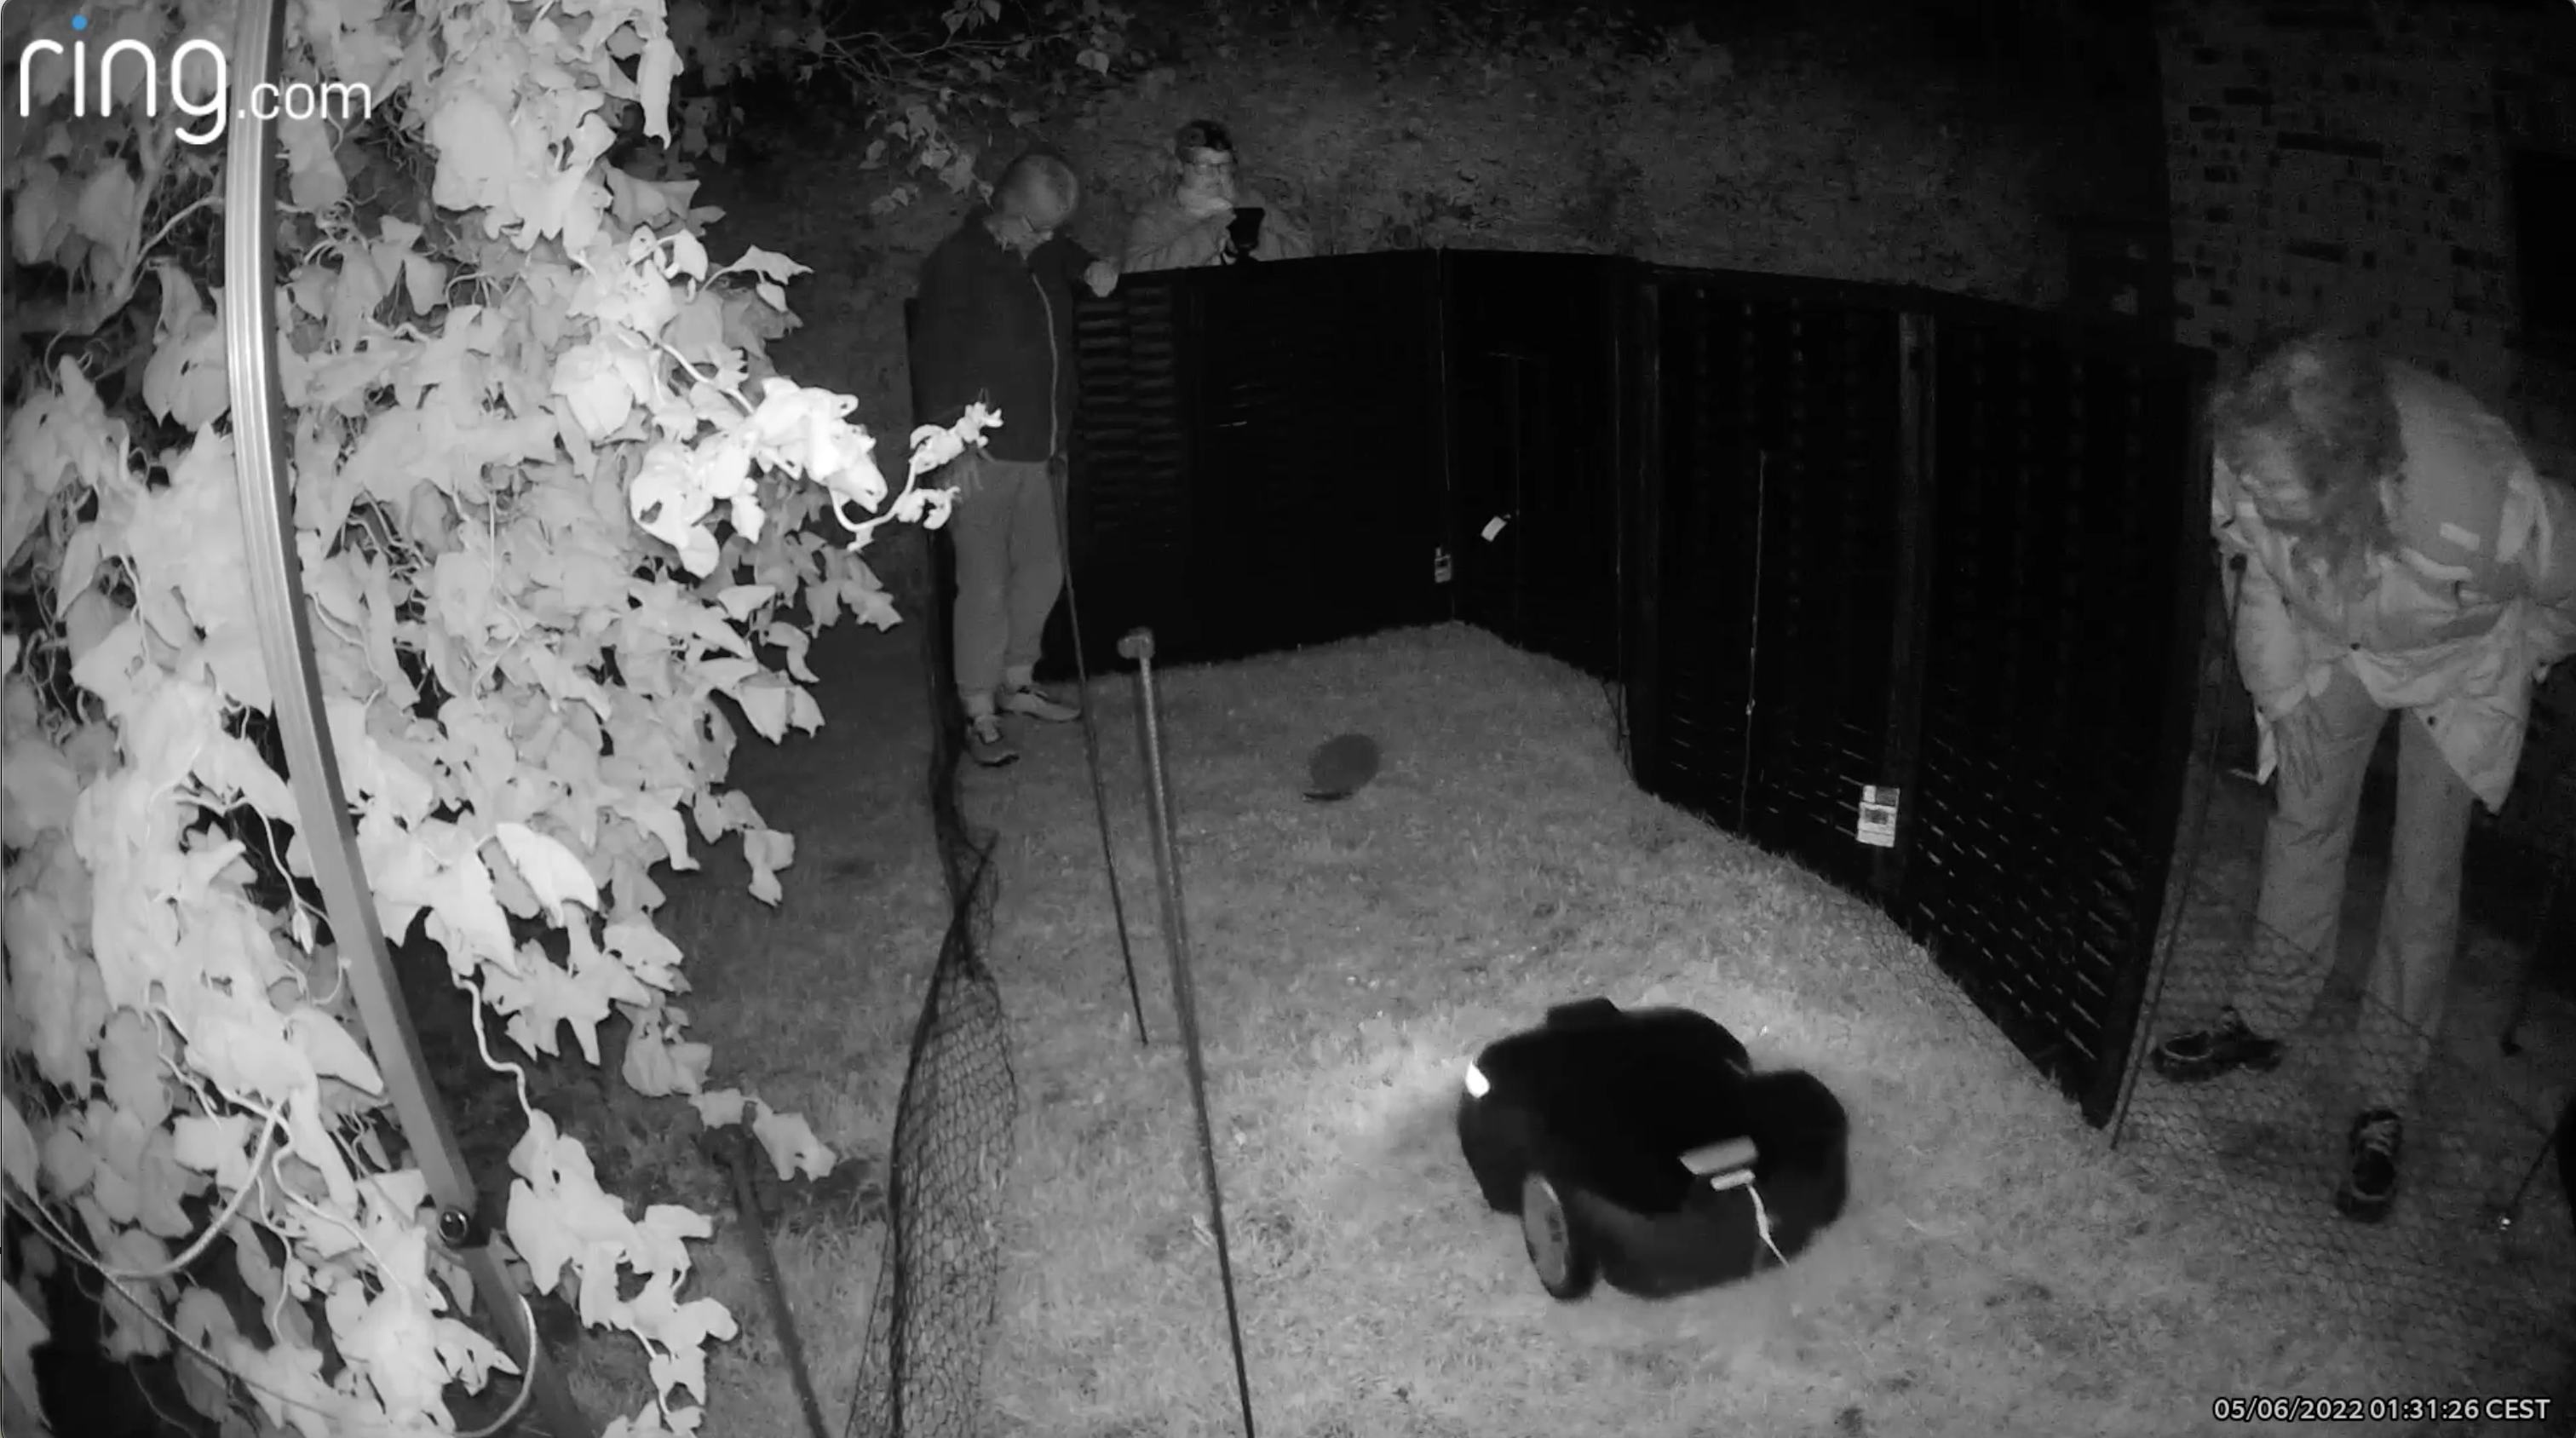 The test setup for the encounter tests between live hedgehogs and a disarmed robotic lawnmower,